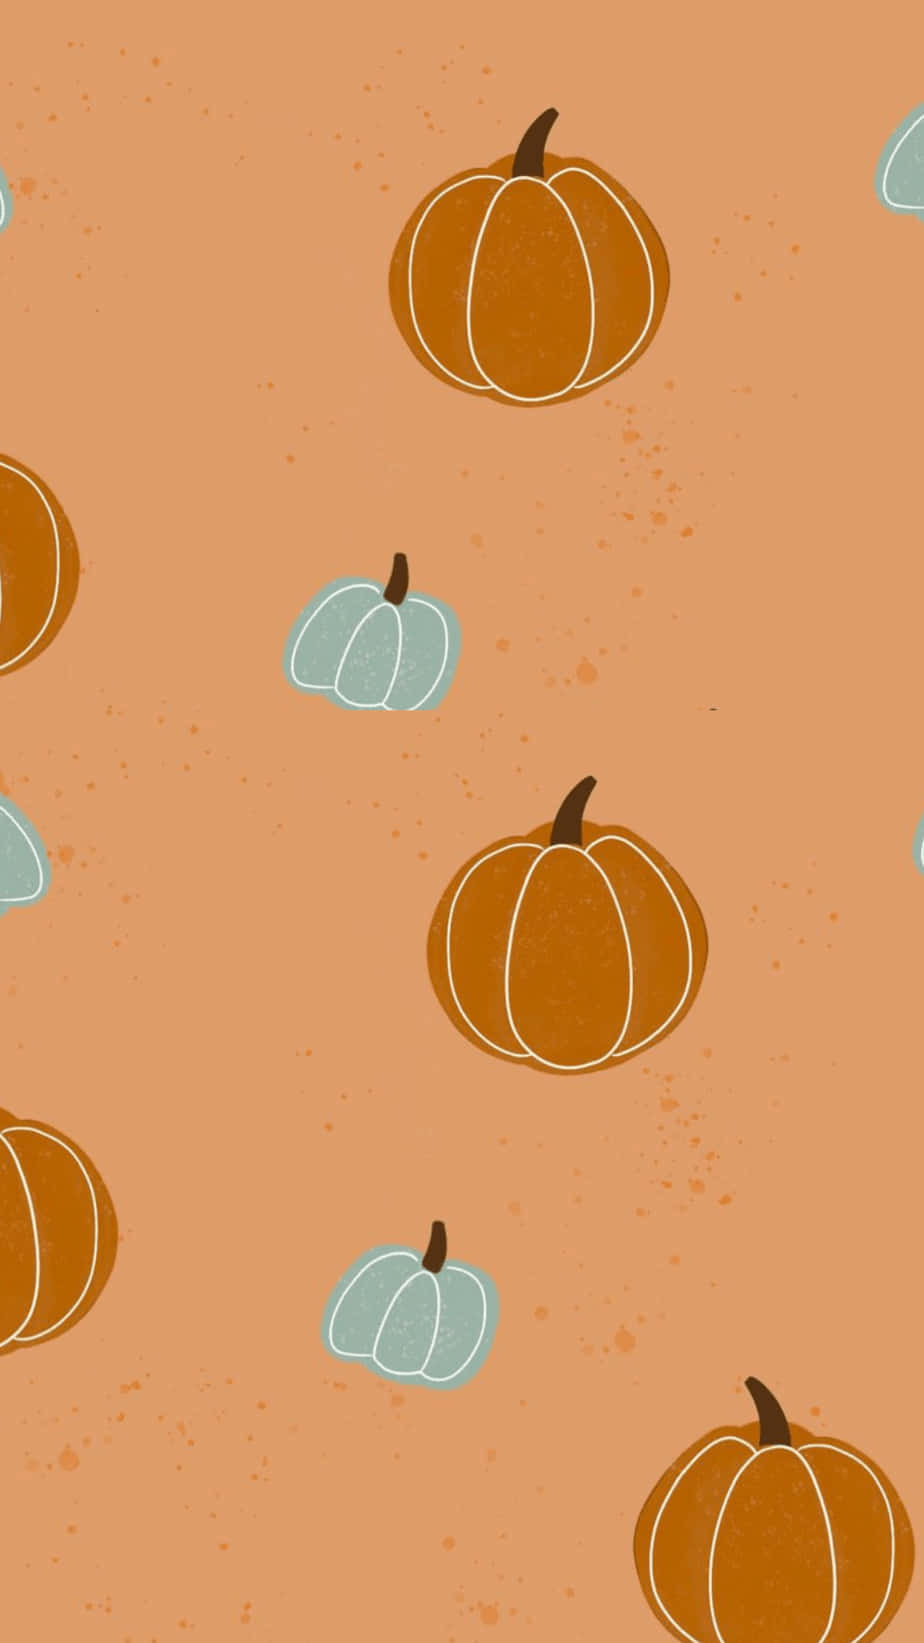 Celebrate the beauty of Autumn with your cute new iPhone Wallpaper